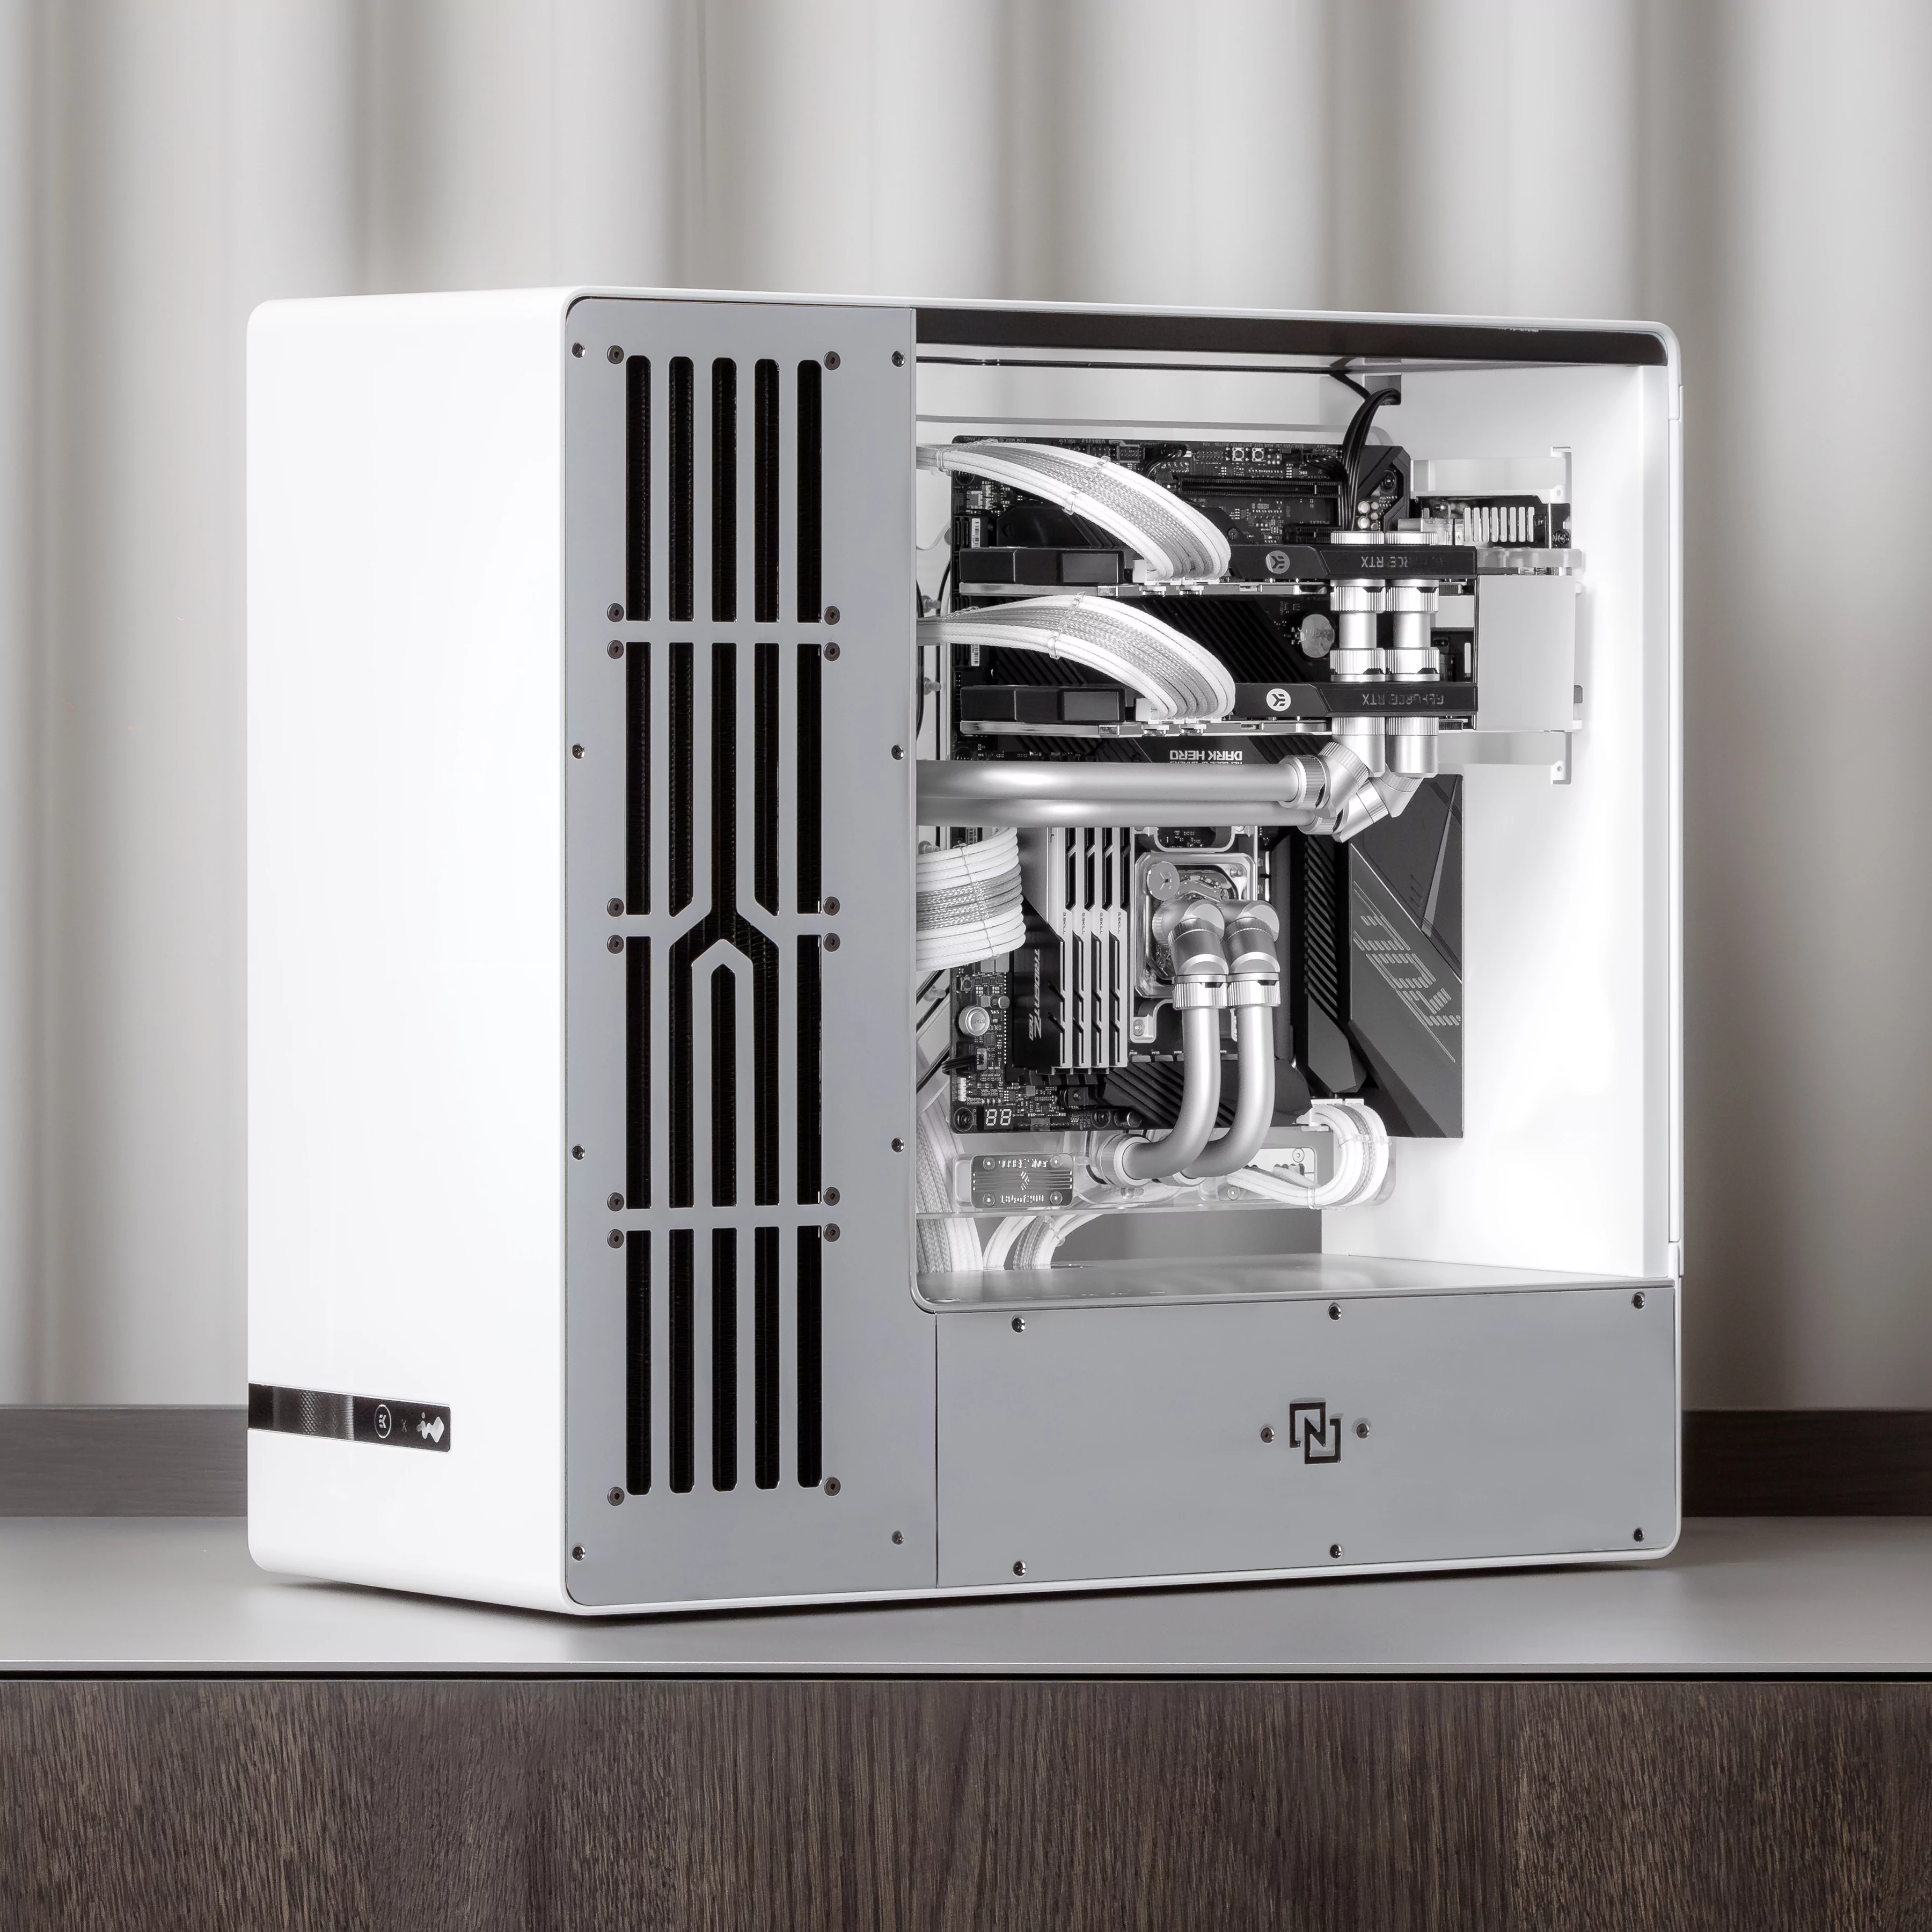 Custom Game PC With Liquid Cooled Components By FENN Systems